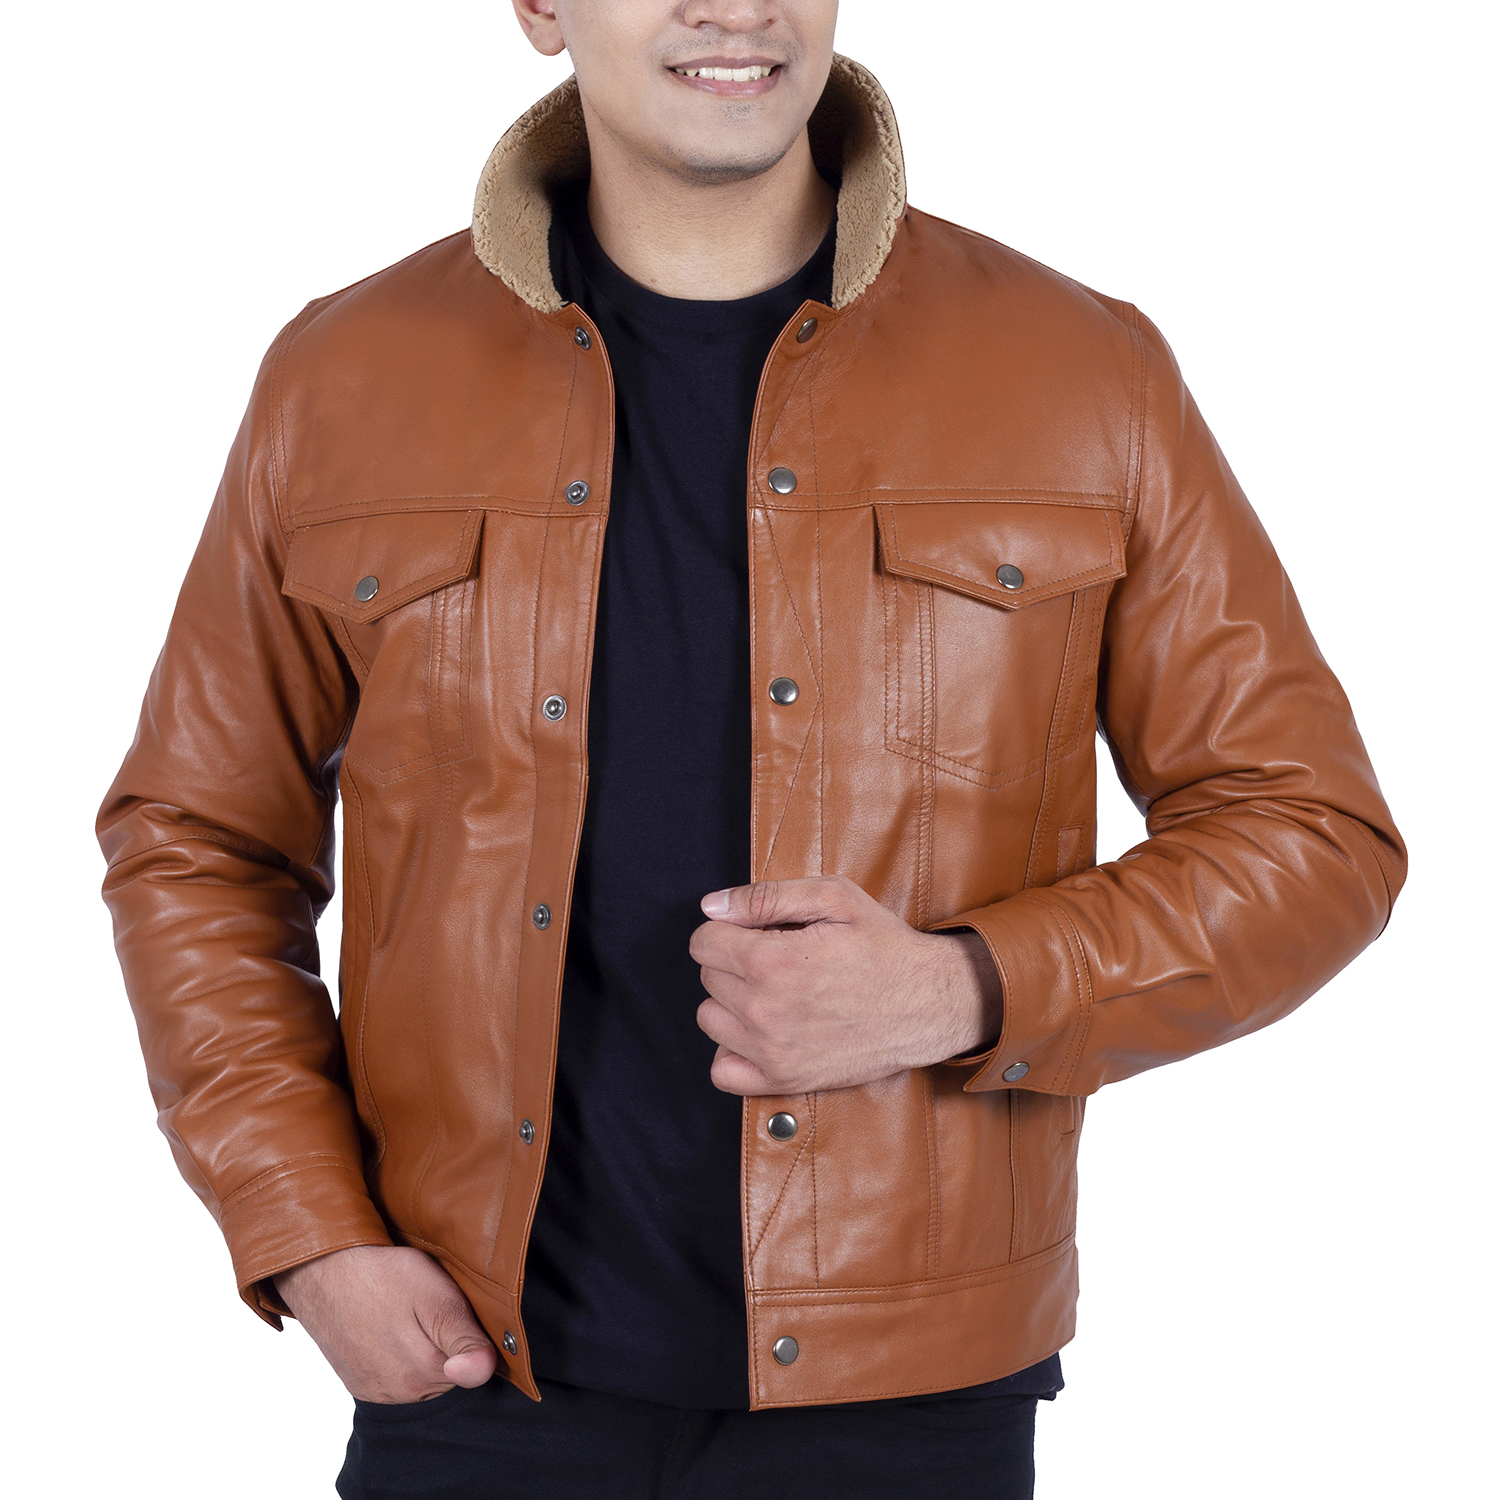 7 Things Should Know About Leather Jackets Manufactured in USA